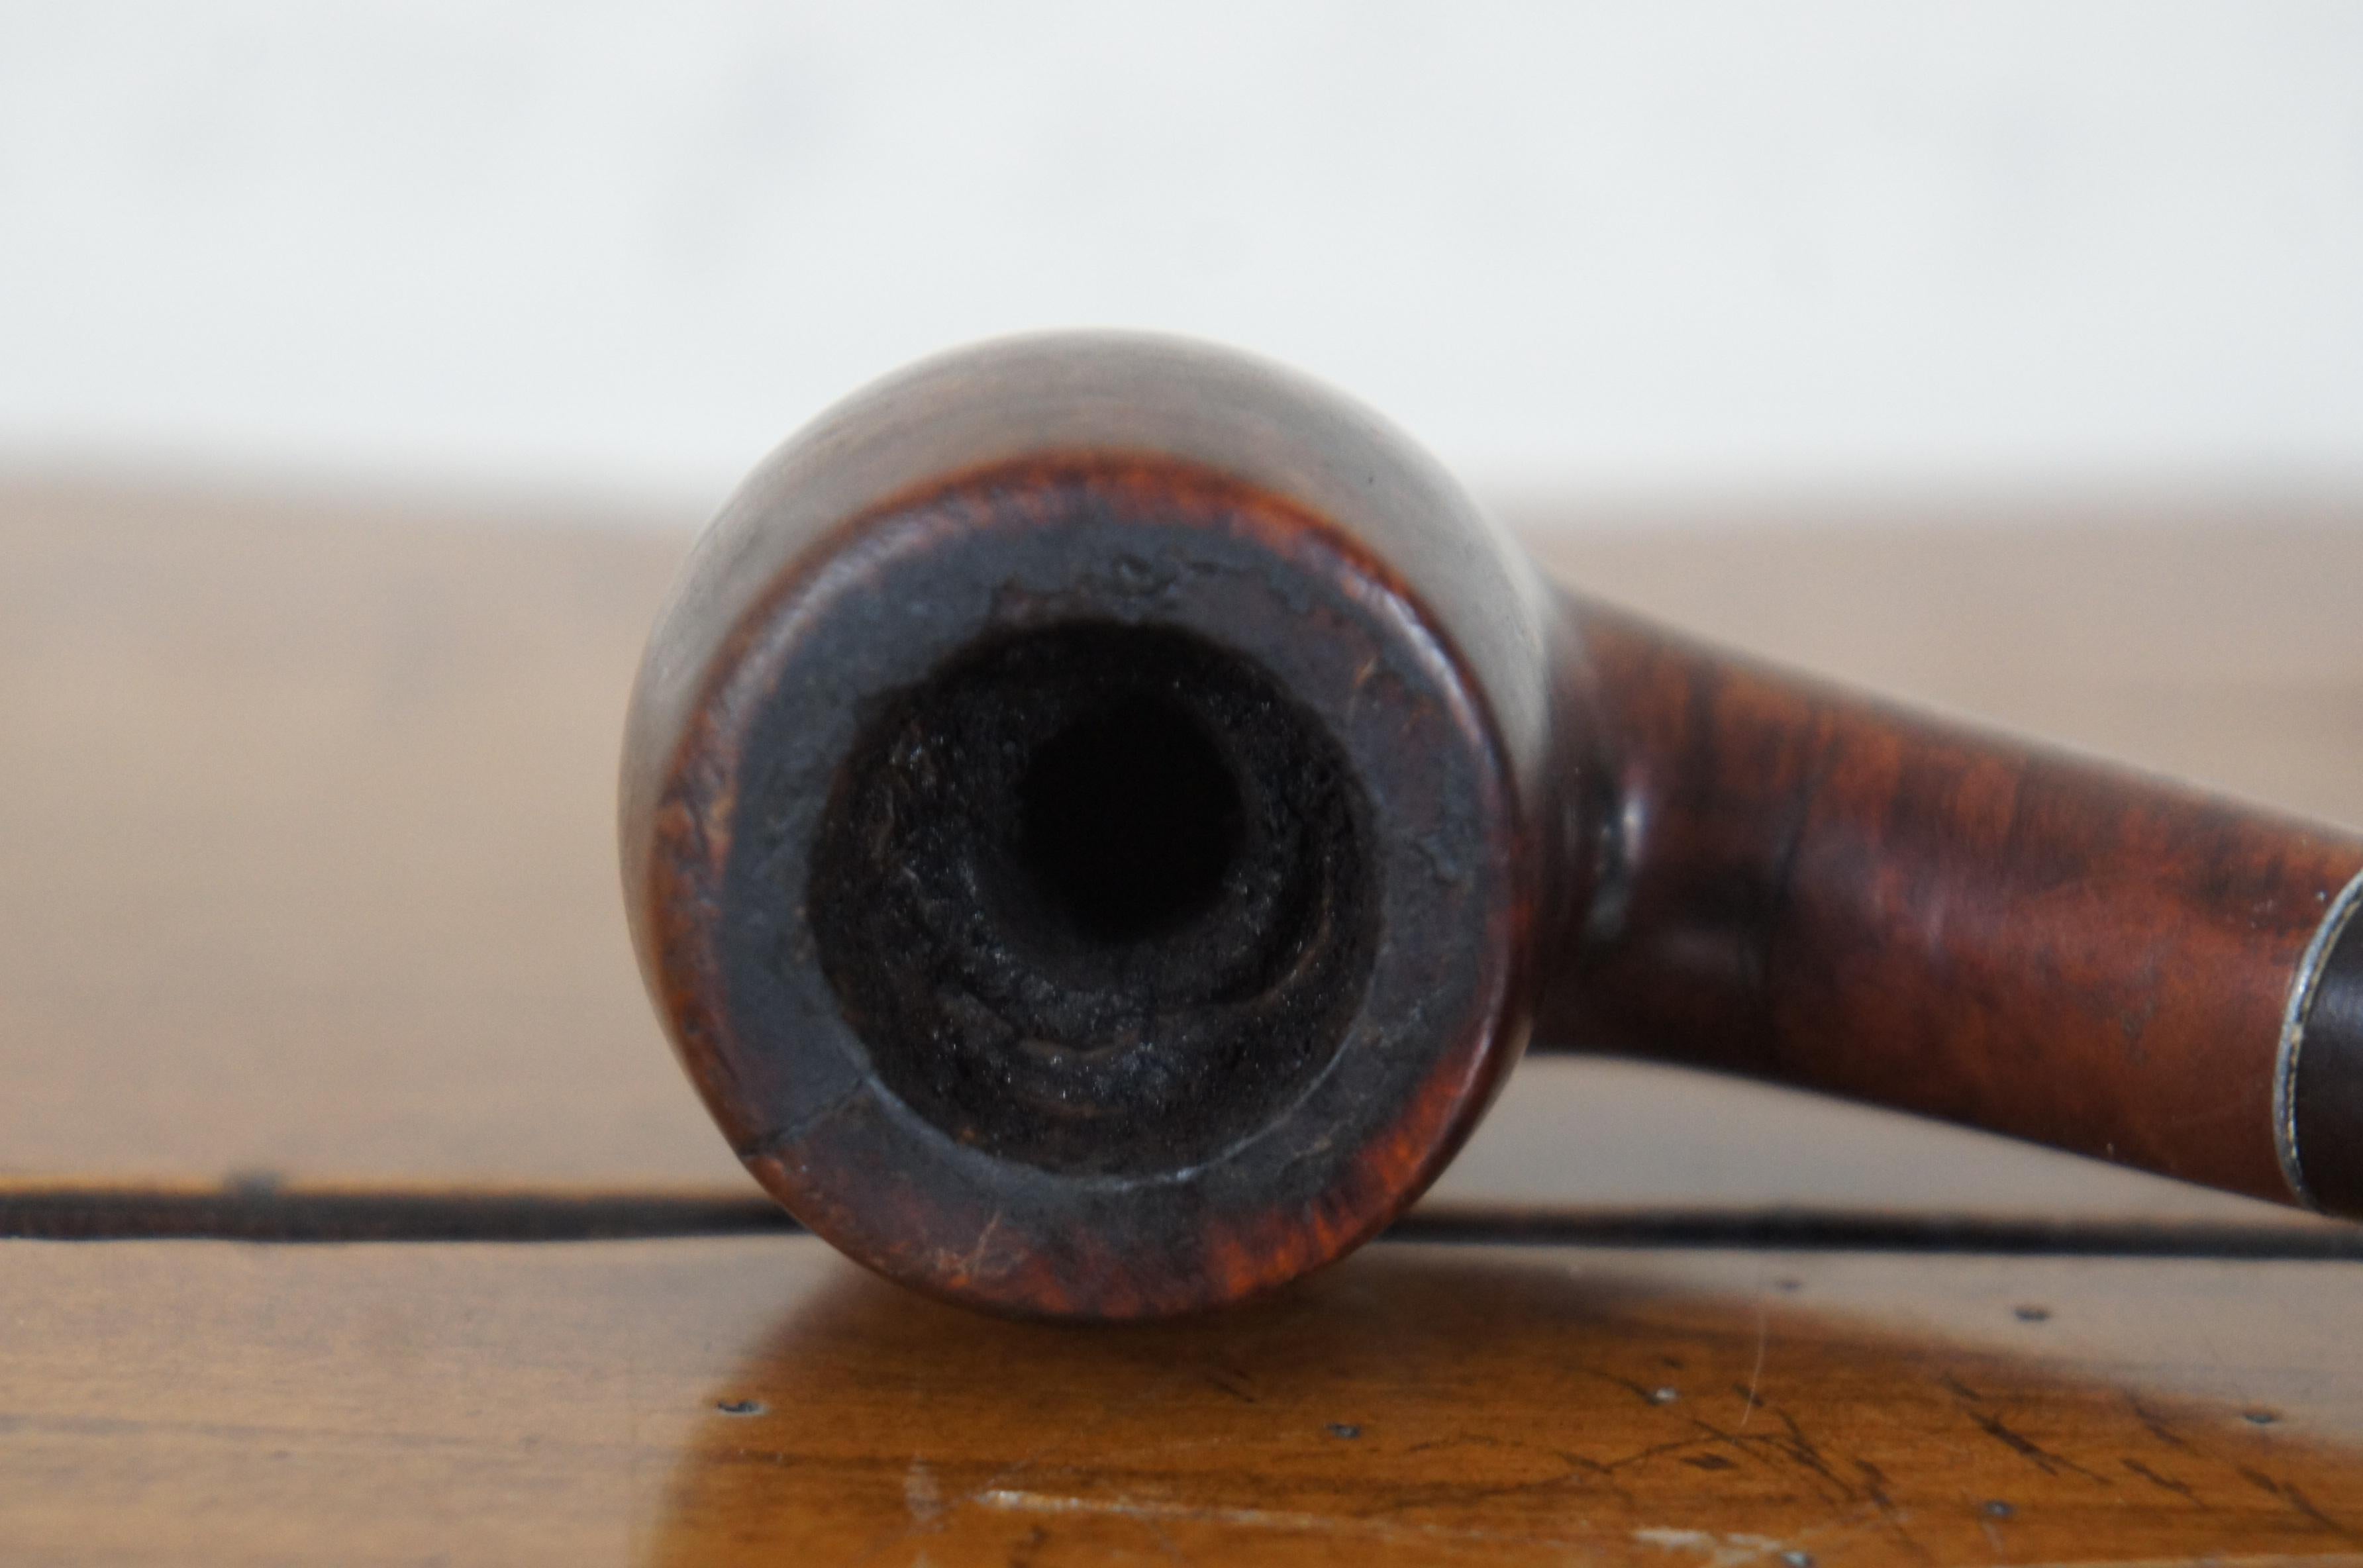 kaywoodie pipes for sale